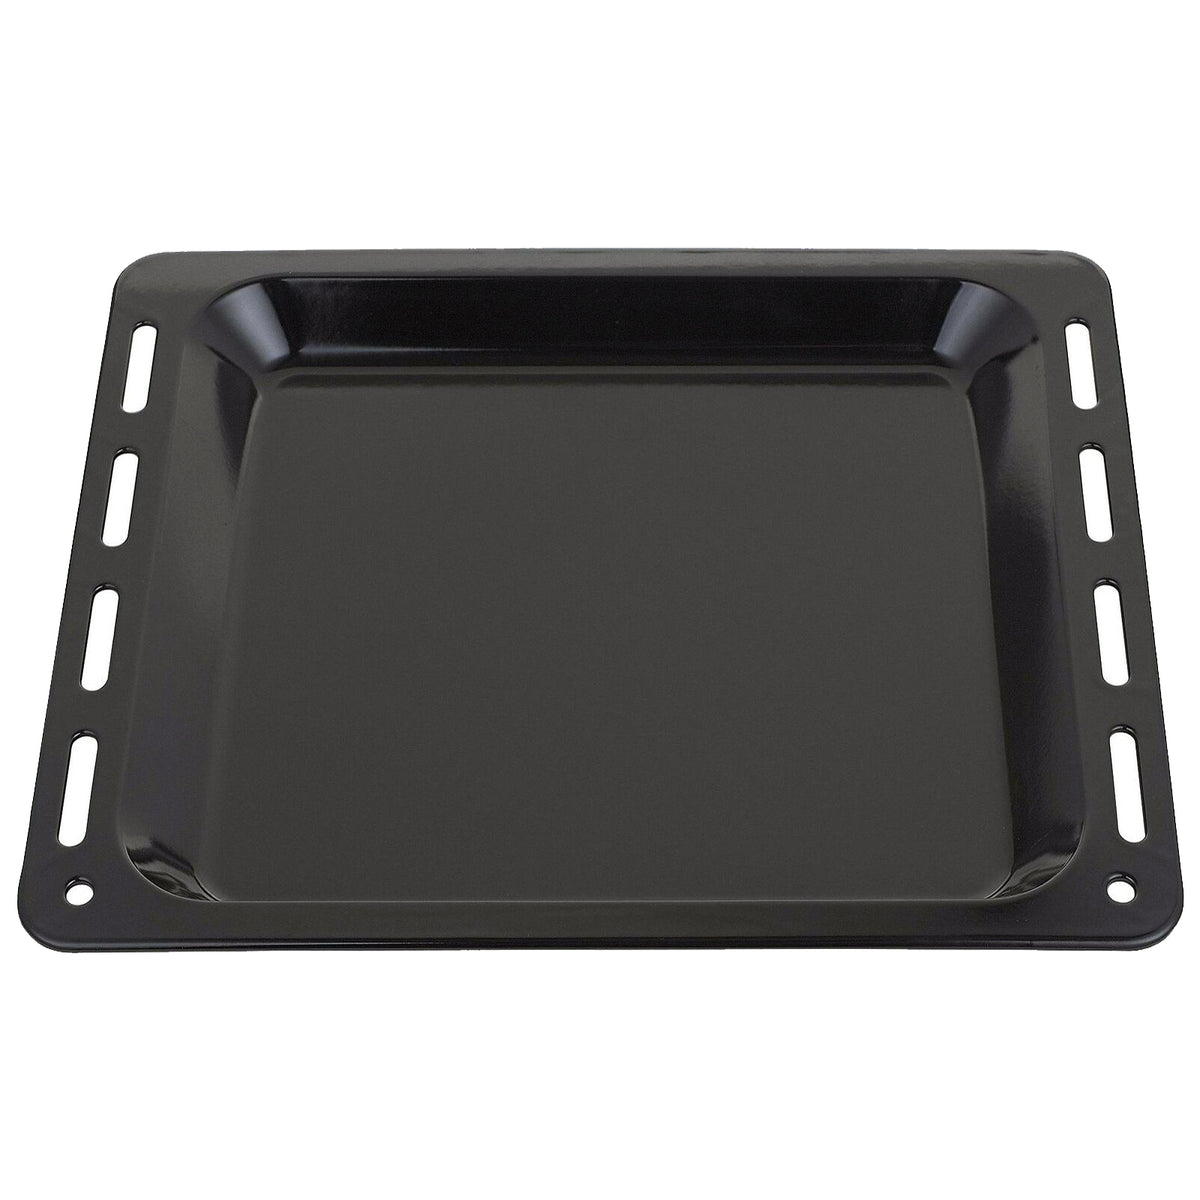 Oven baking tray, AEG cooker & hobs - 37 mm x 466 mm x 385 mm